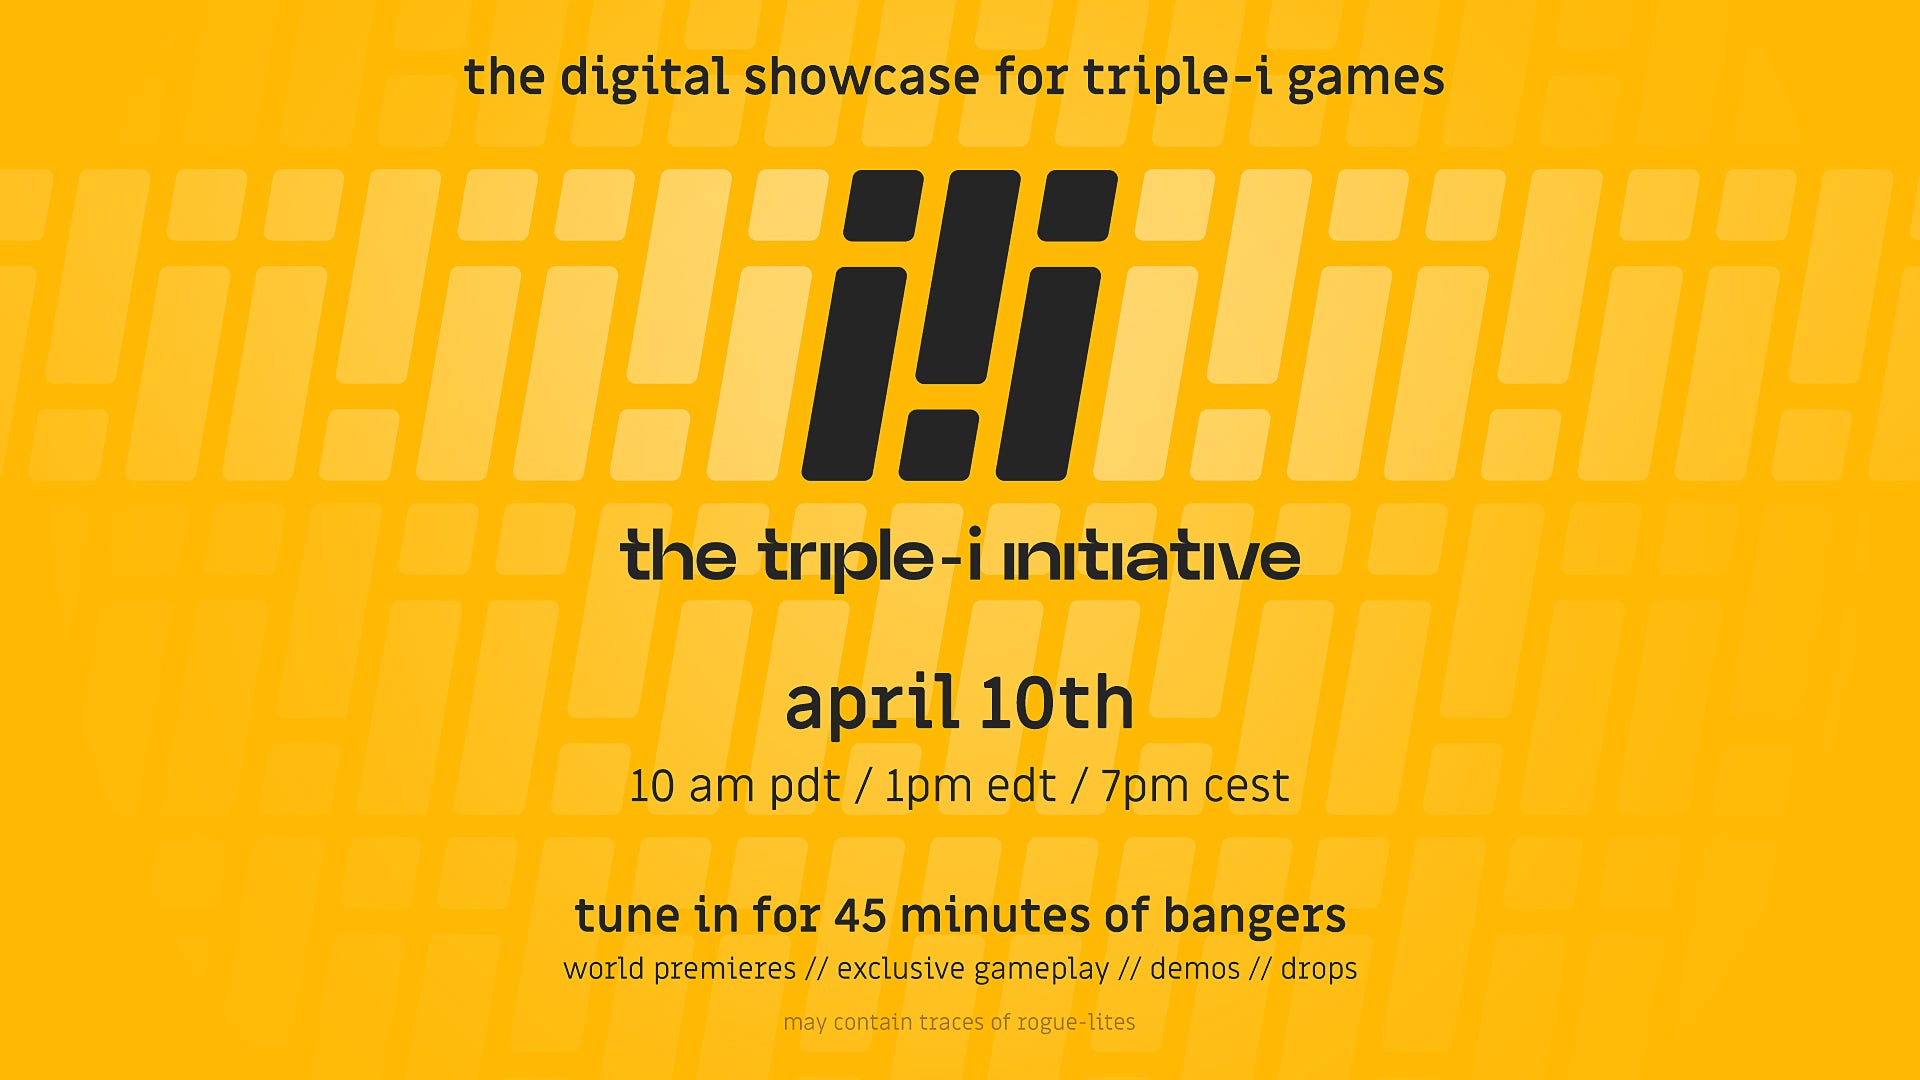 The developers of Dead Cells, Darkest Dungeon and Slay The Spire are launching their own "triple-I" Game Awards